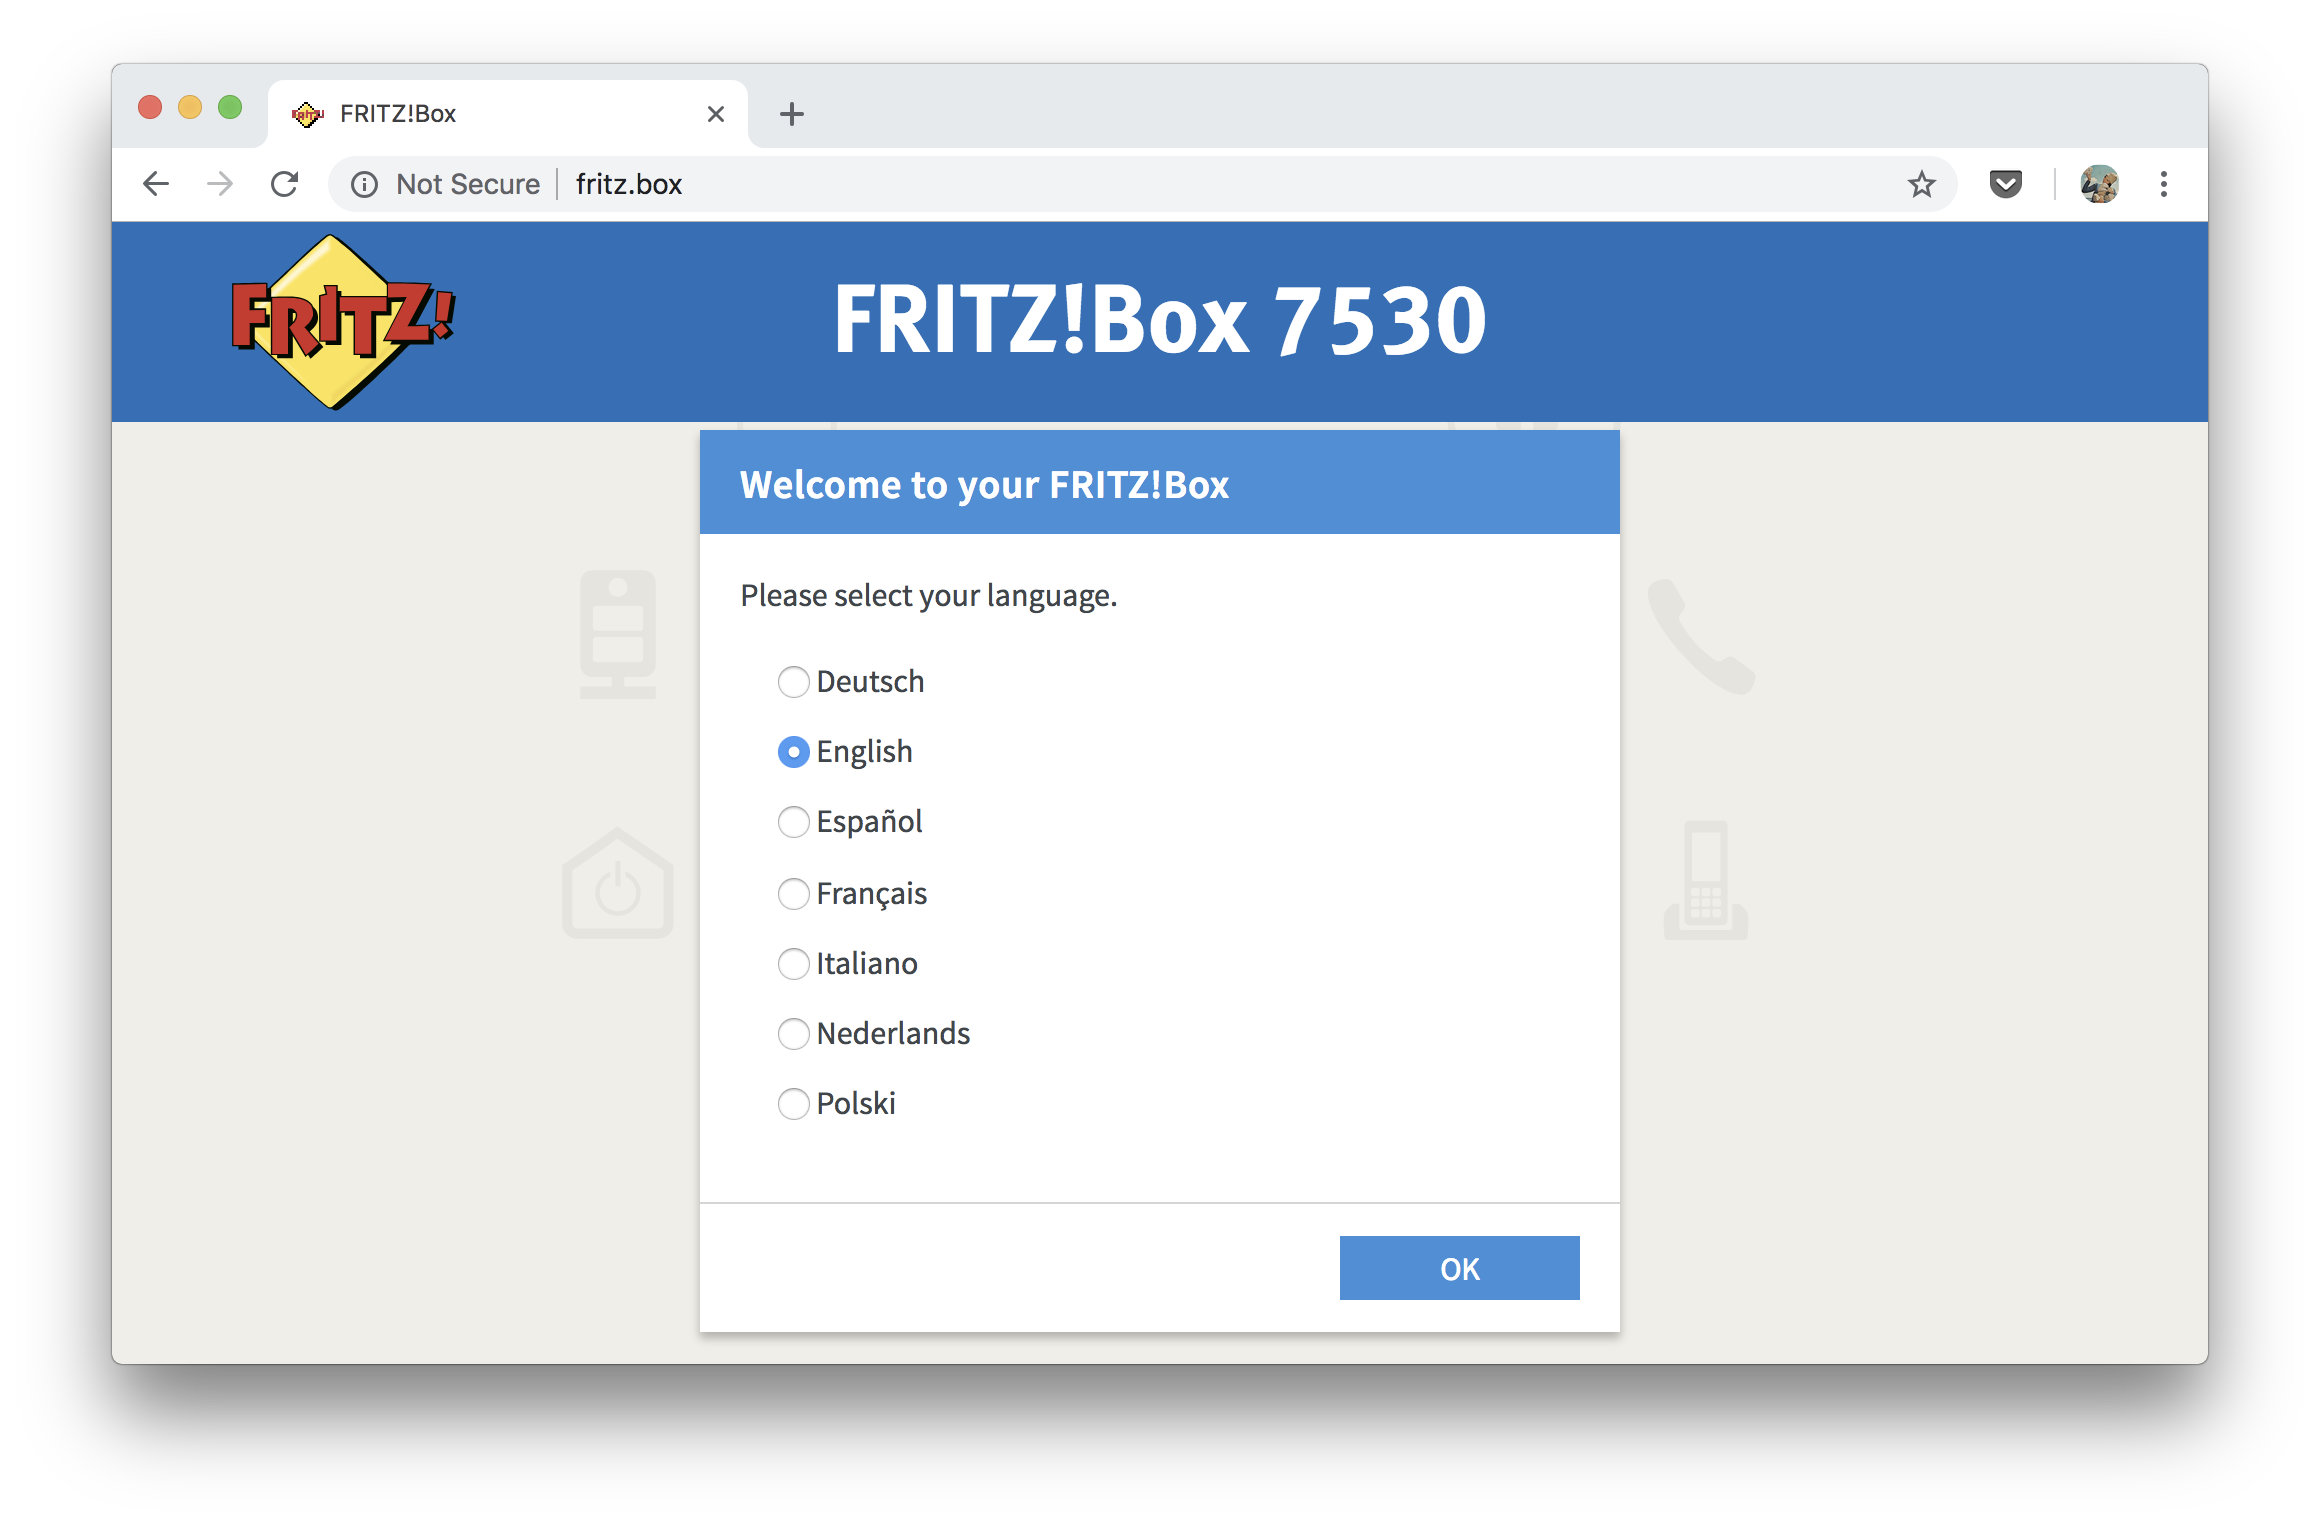 How do I install and configure my FRITZ!Box 7530 for use with a fiber connection